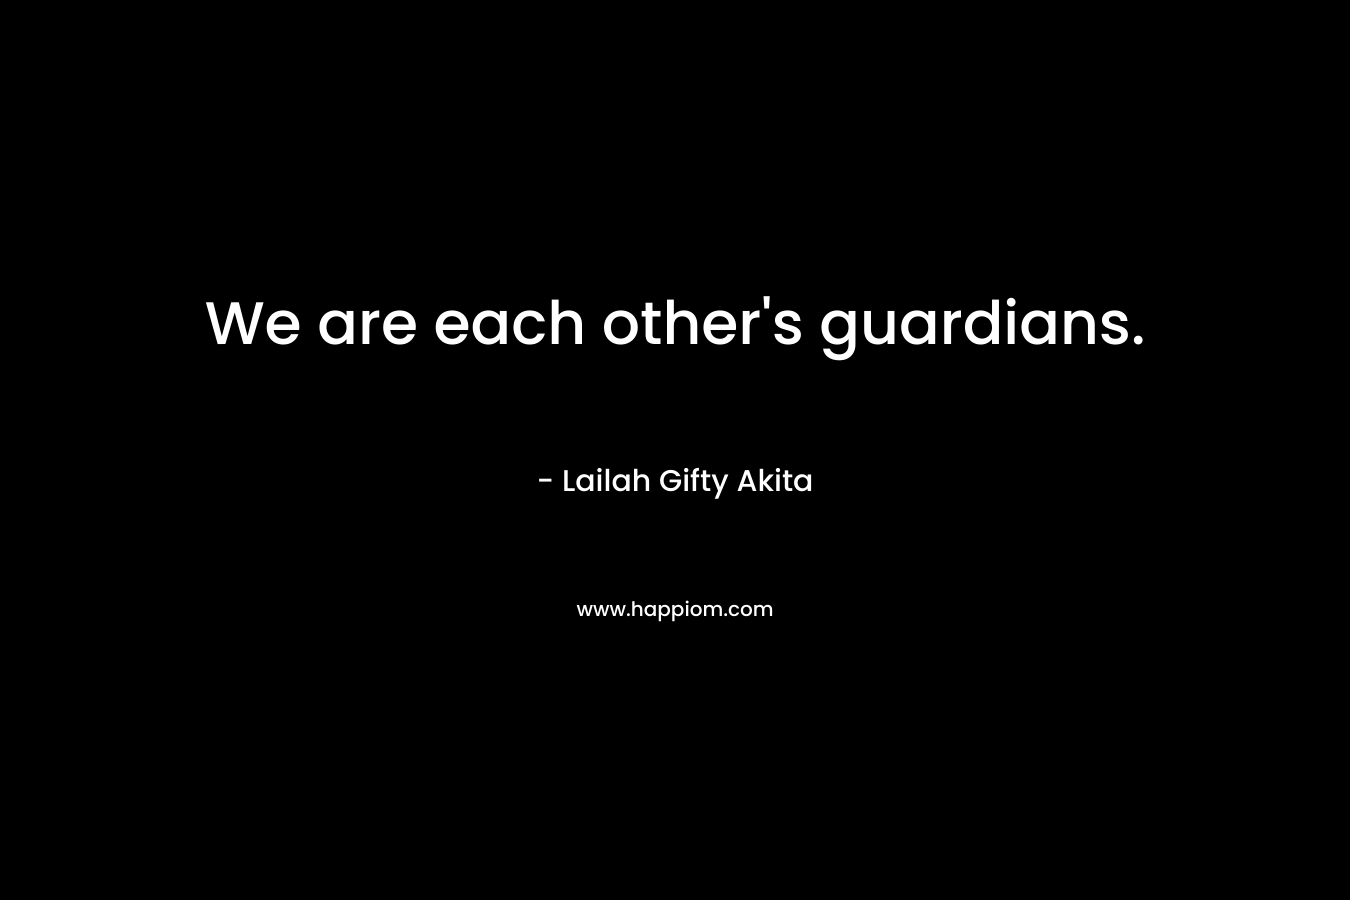 We are each other's guardians.